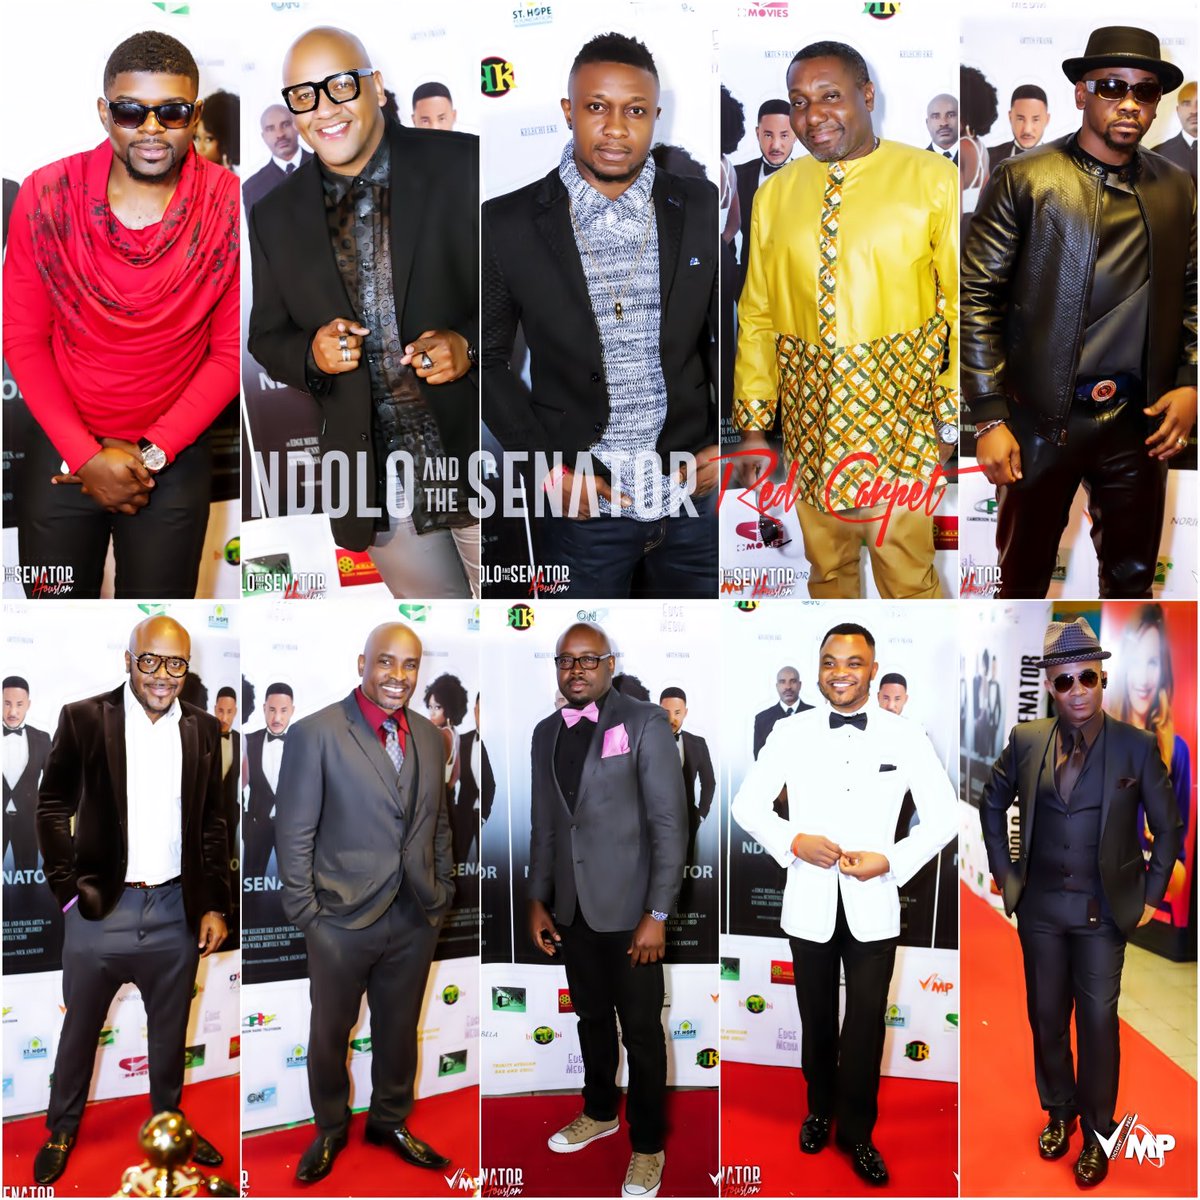 Actors, Nollywood and Callywood Stars sported at Ndolor and the Senator Premiere, #WhoNailedIt ?